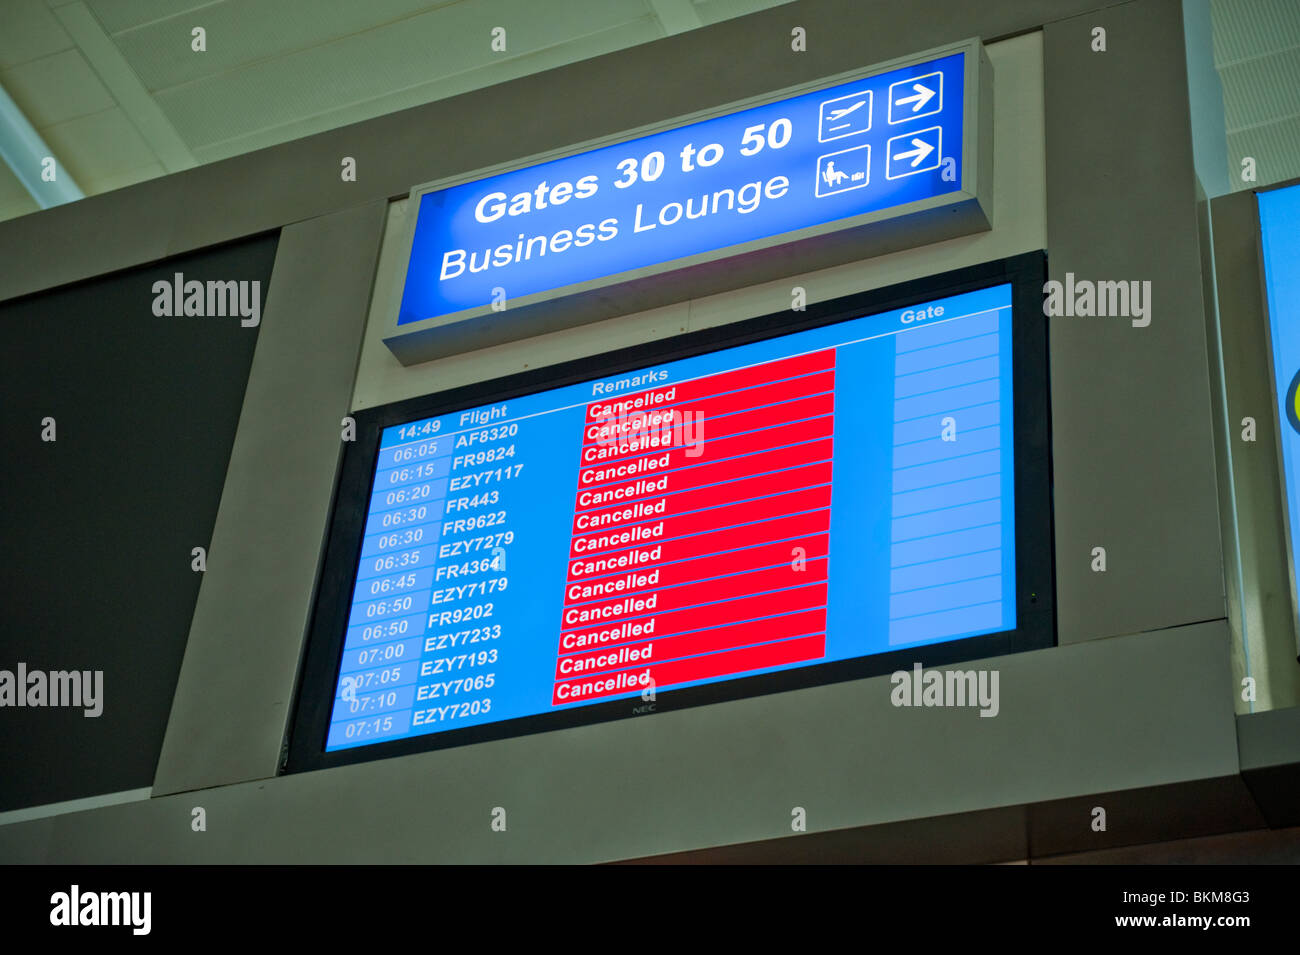 Airport business lounge all flights cancelled Stock Photo